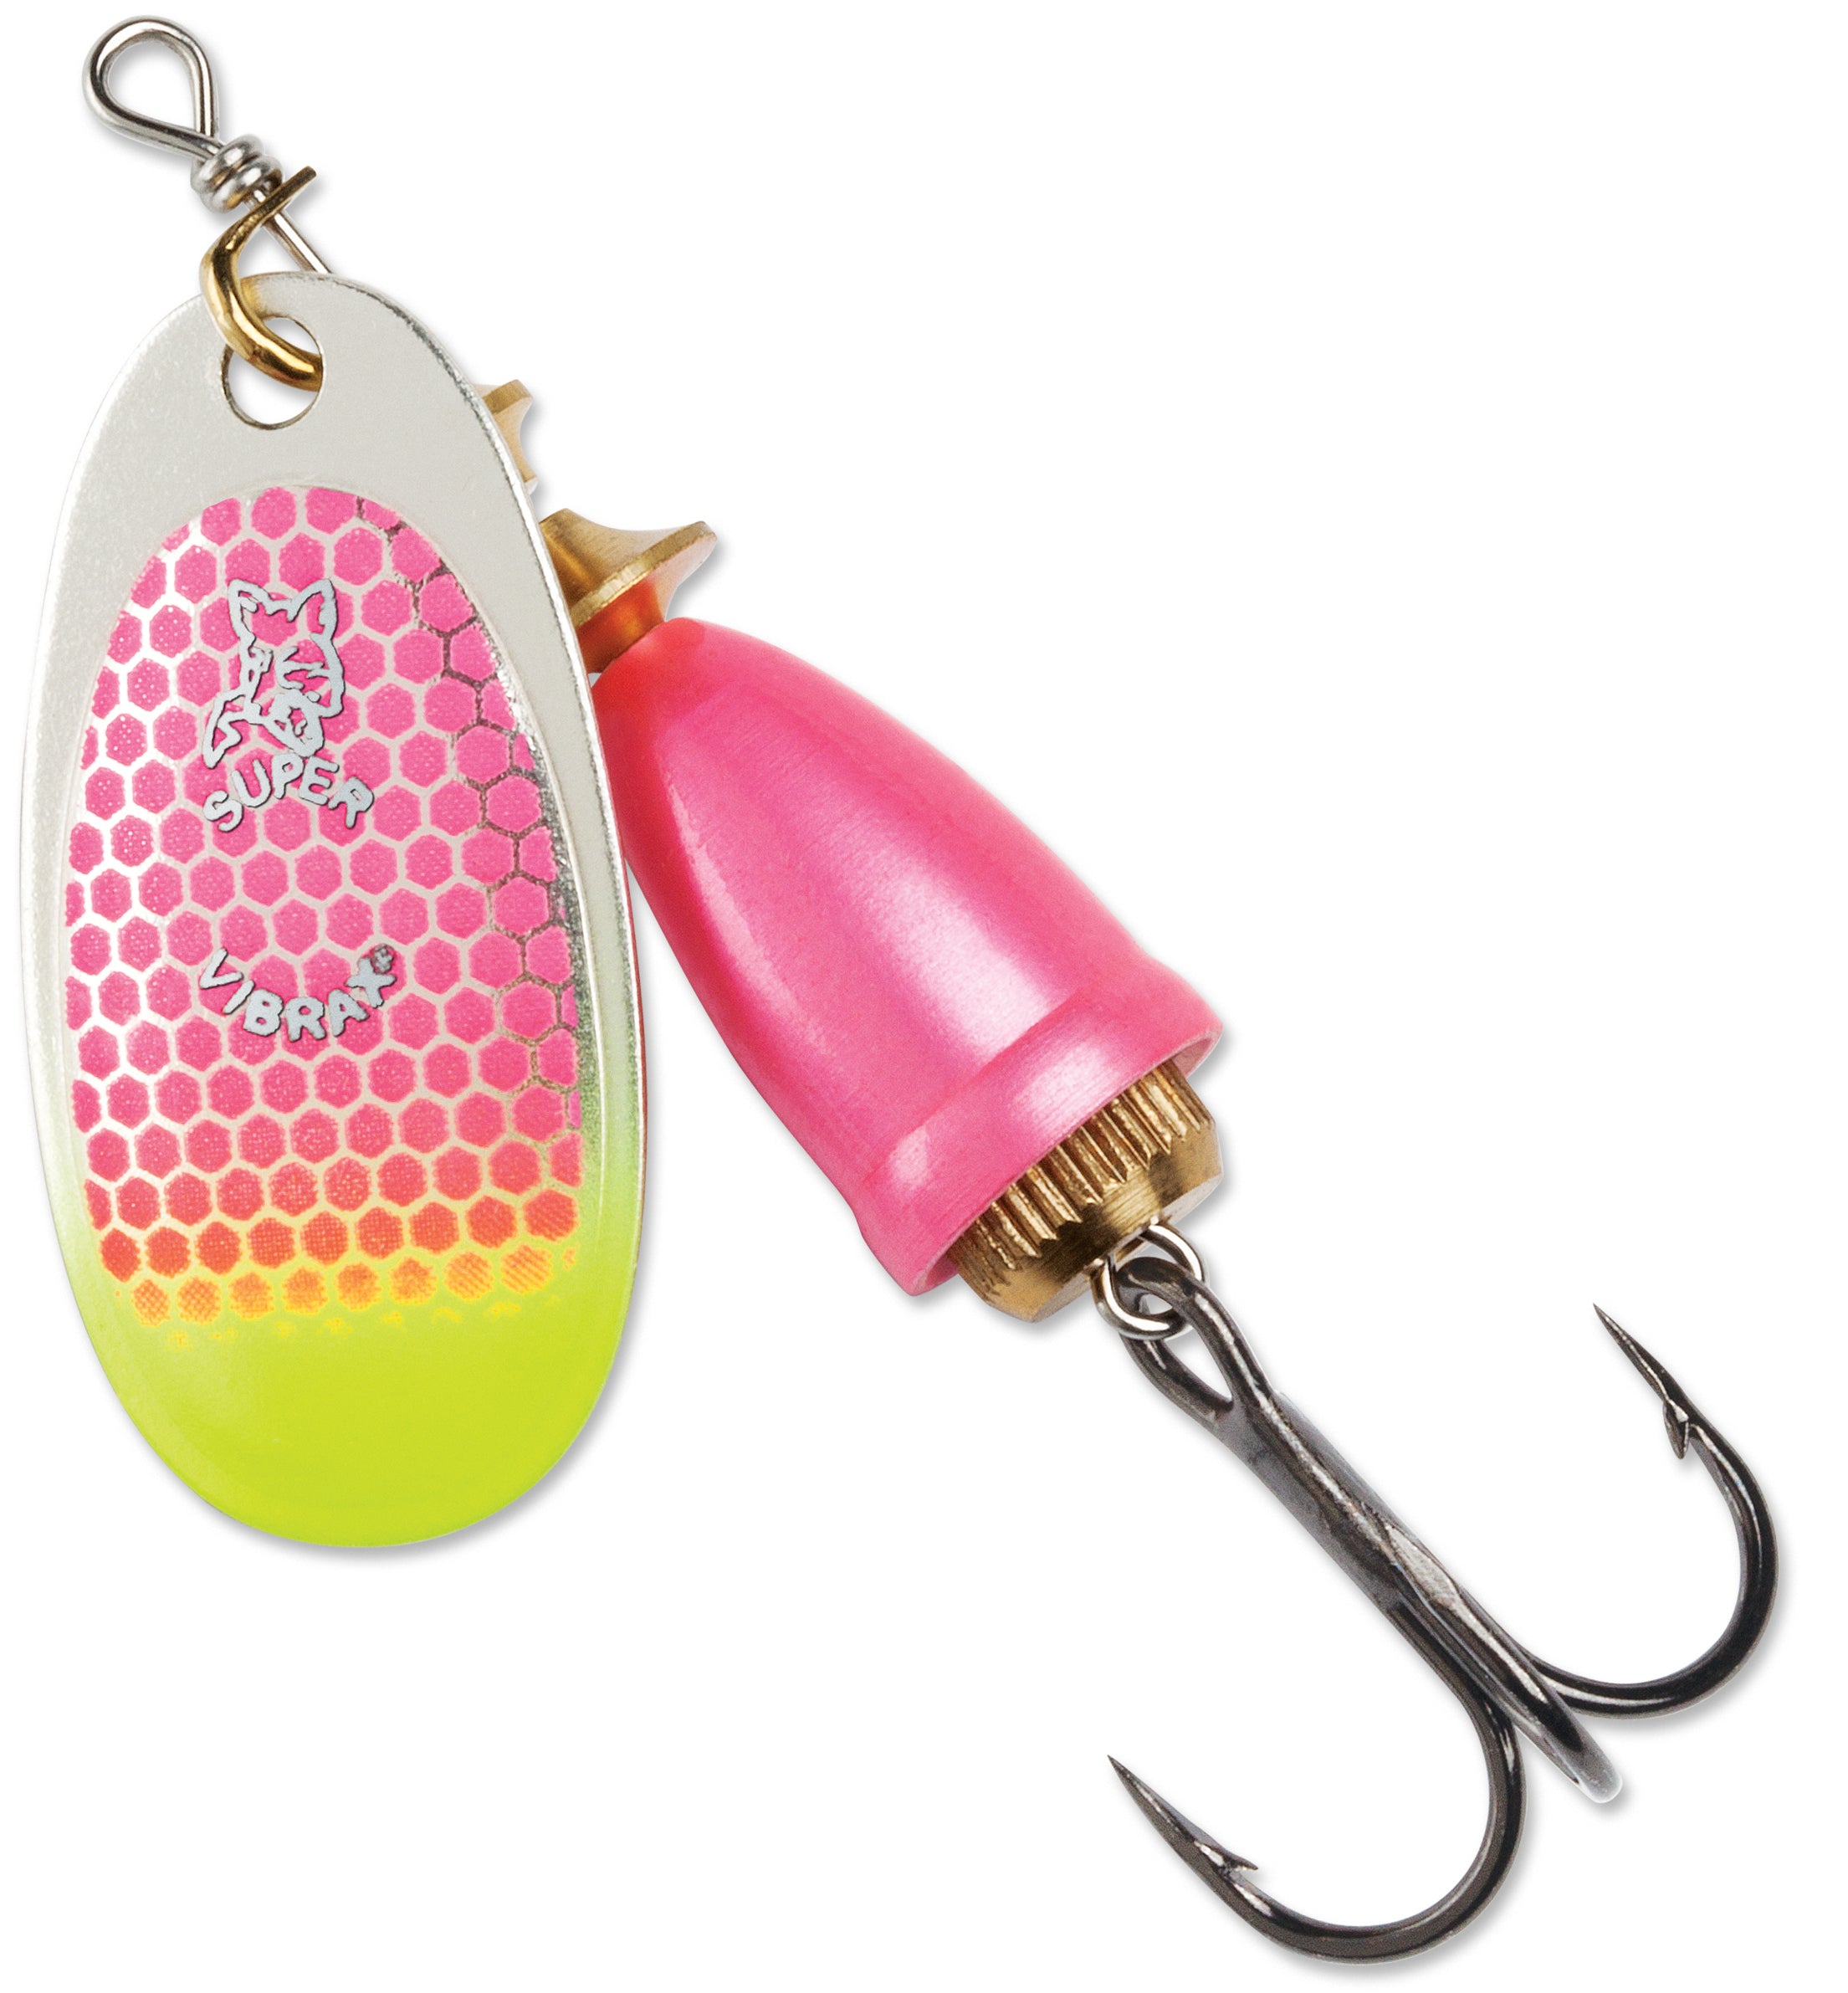 Blue Fox Classic Vibrax Spinner Pink Scale Chartreuse Tip UV; 4